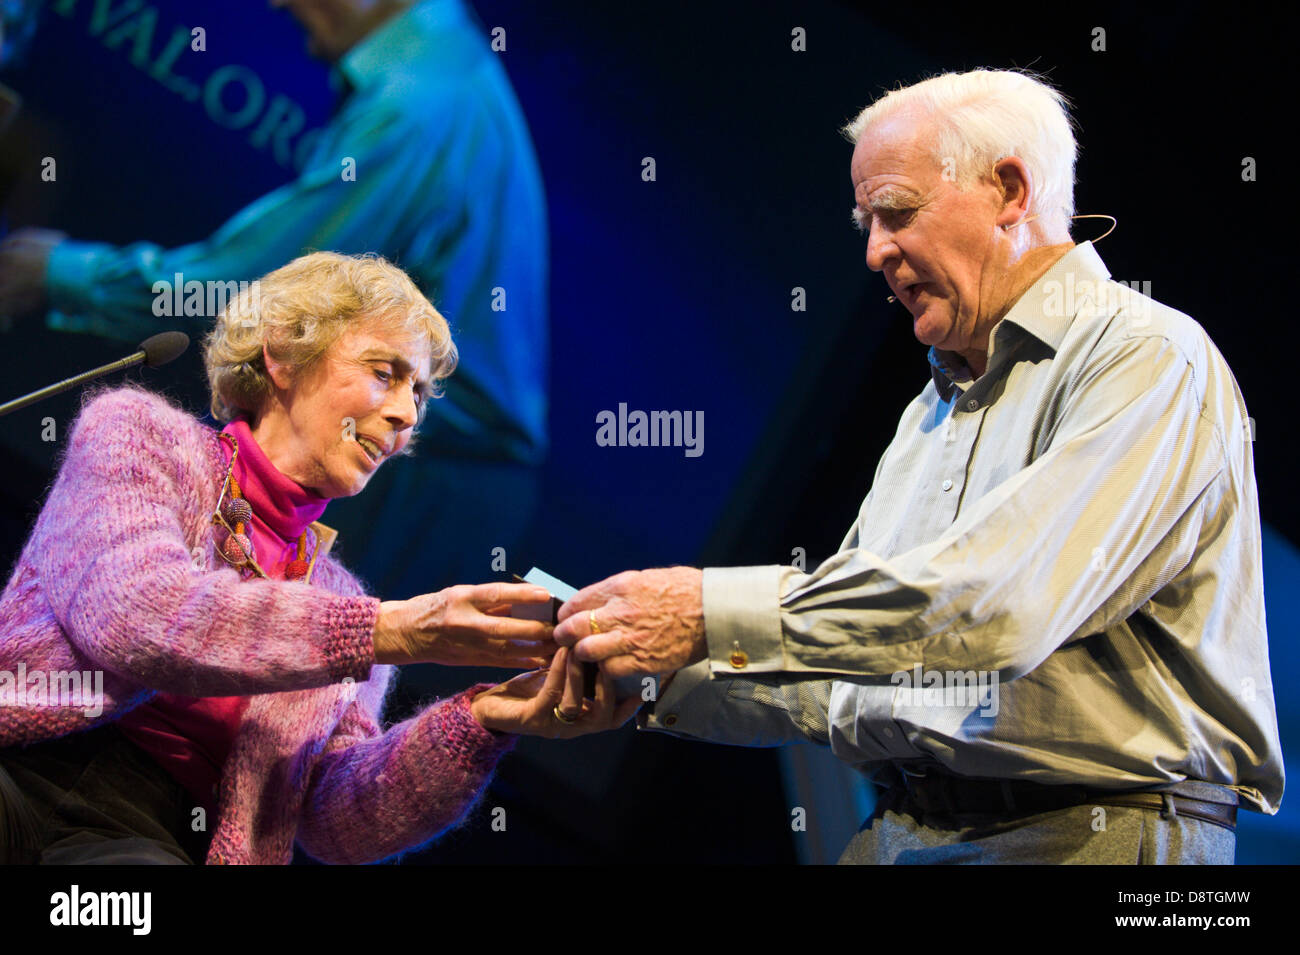 John le Carre author of spy novels talking about his work at Hay Festival 2013 Hay on Wye Powys Wales UK Stock Photo